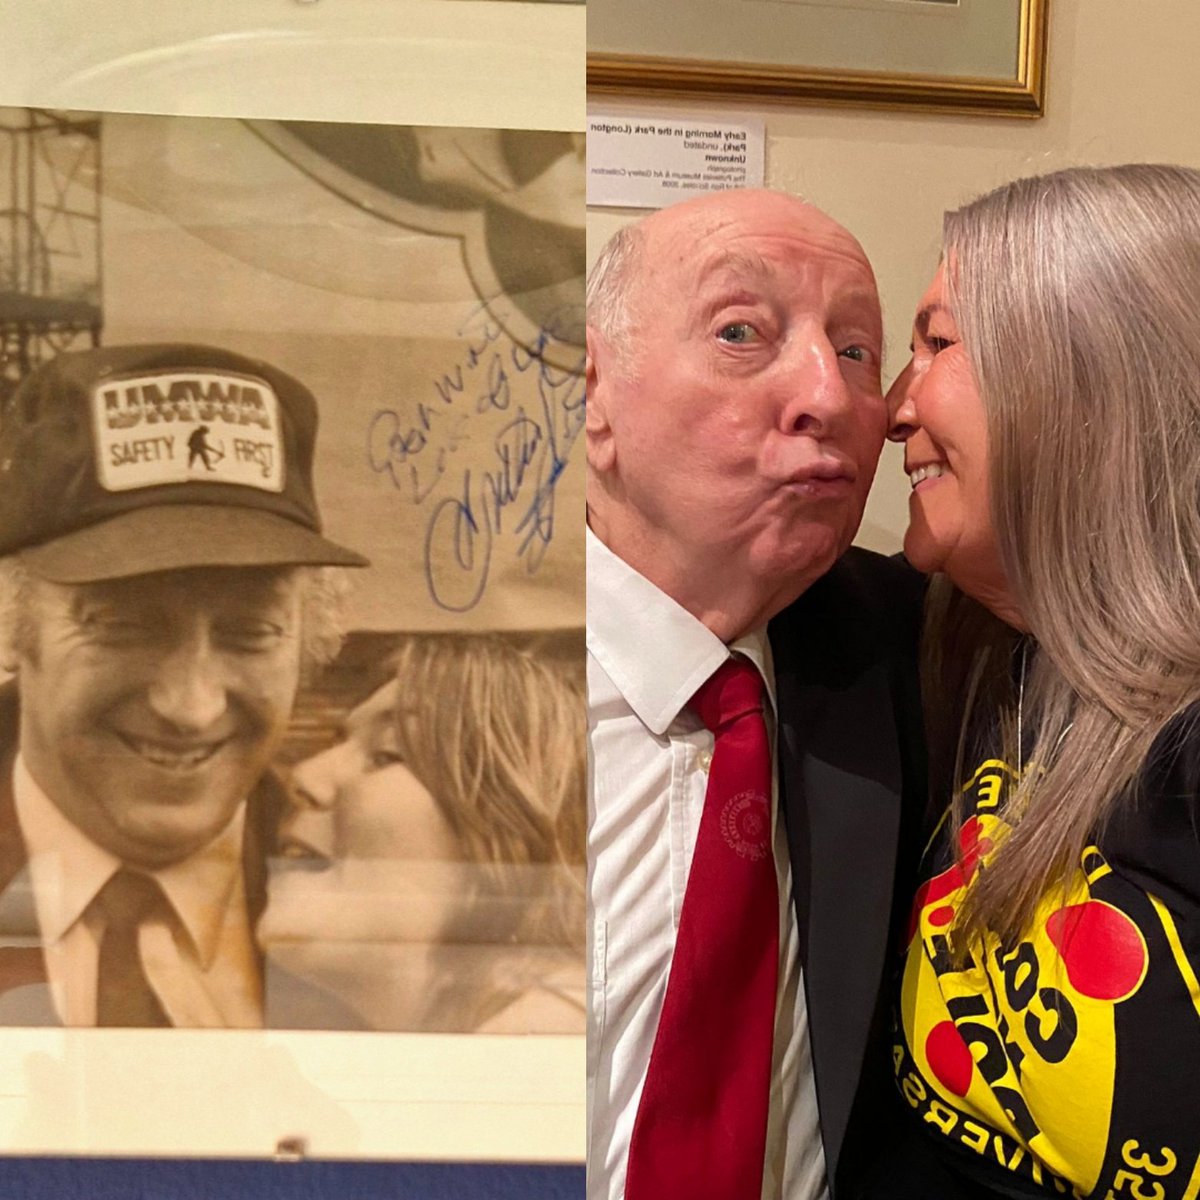 The absolute honour of my life today to recreate a photo 40 years apart with the great #ArthurScargill Today, we celebrated 40 years of the #MinersStrike & the roles that women played during the year long dispute. #NoGoingBack #weAreWomenWeAreStrong